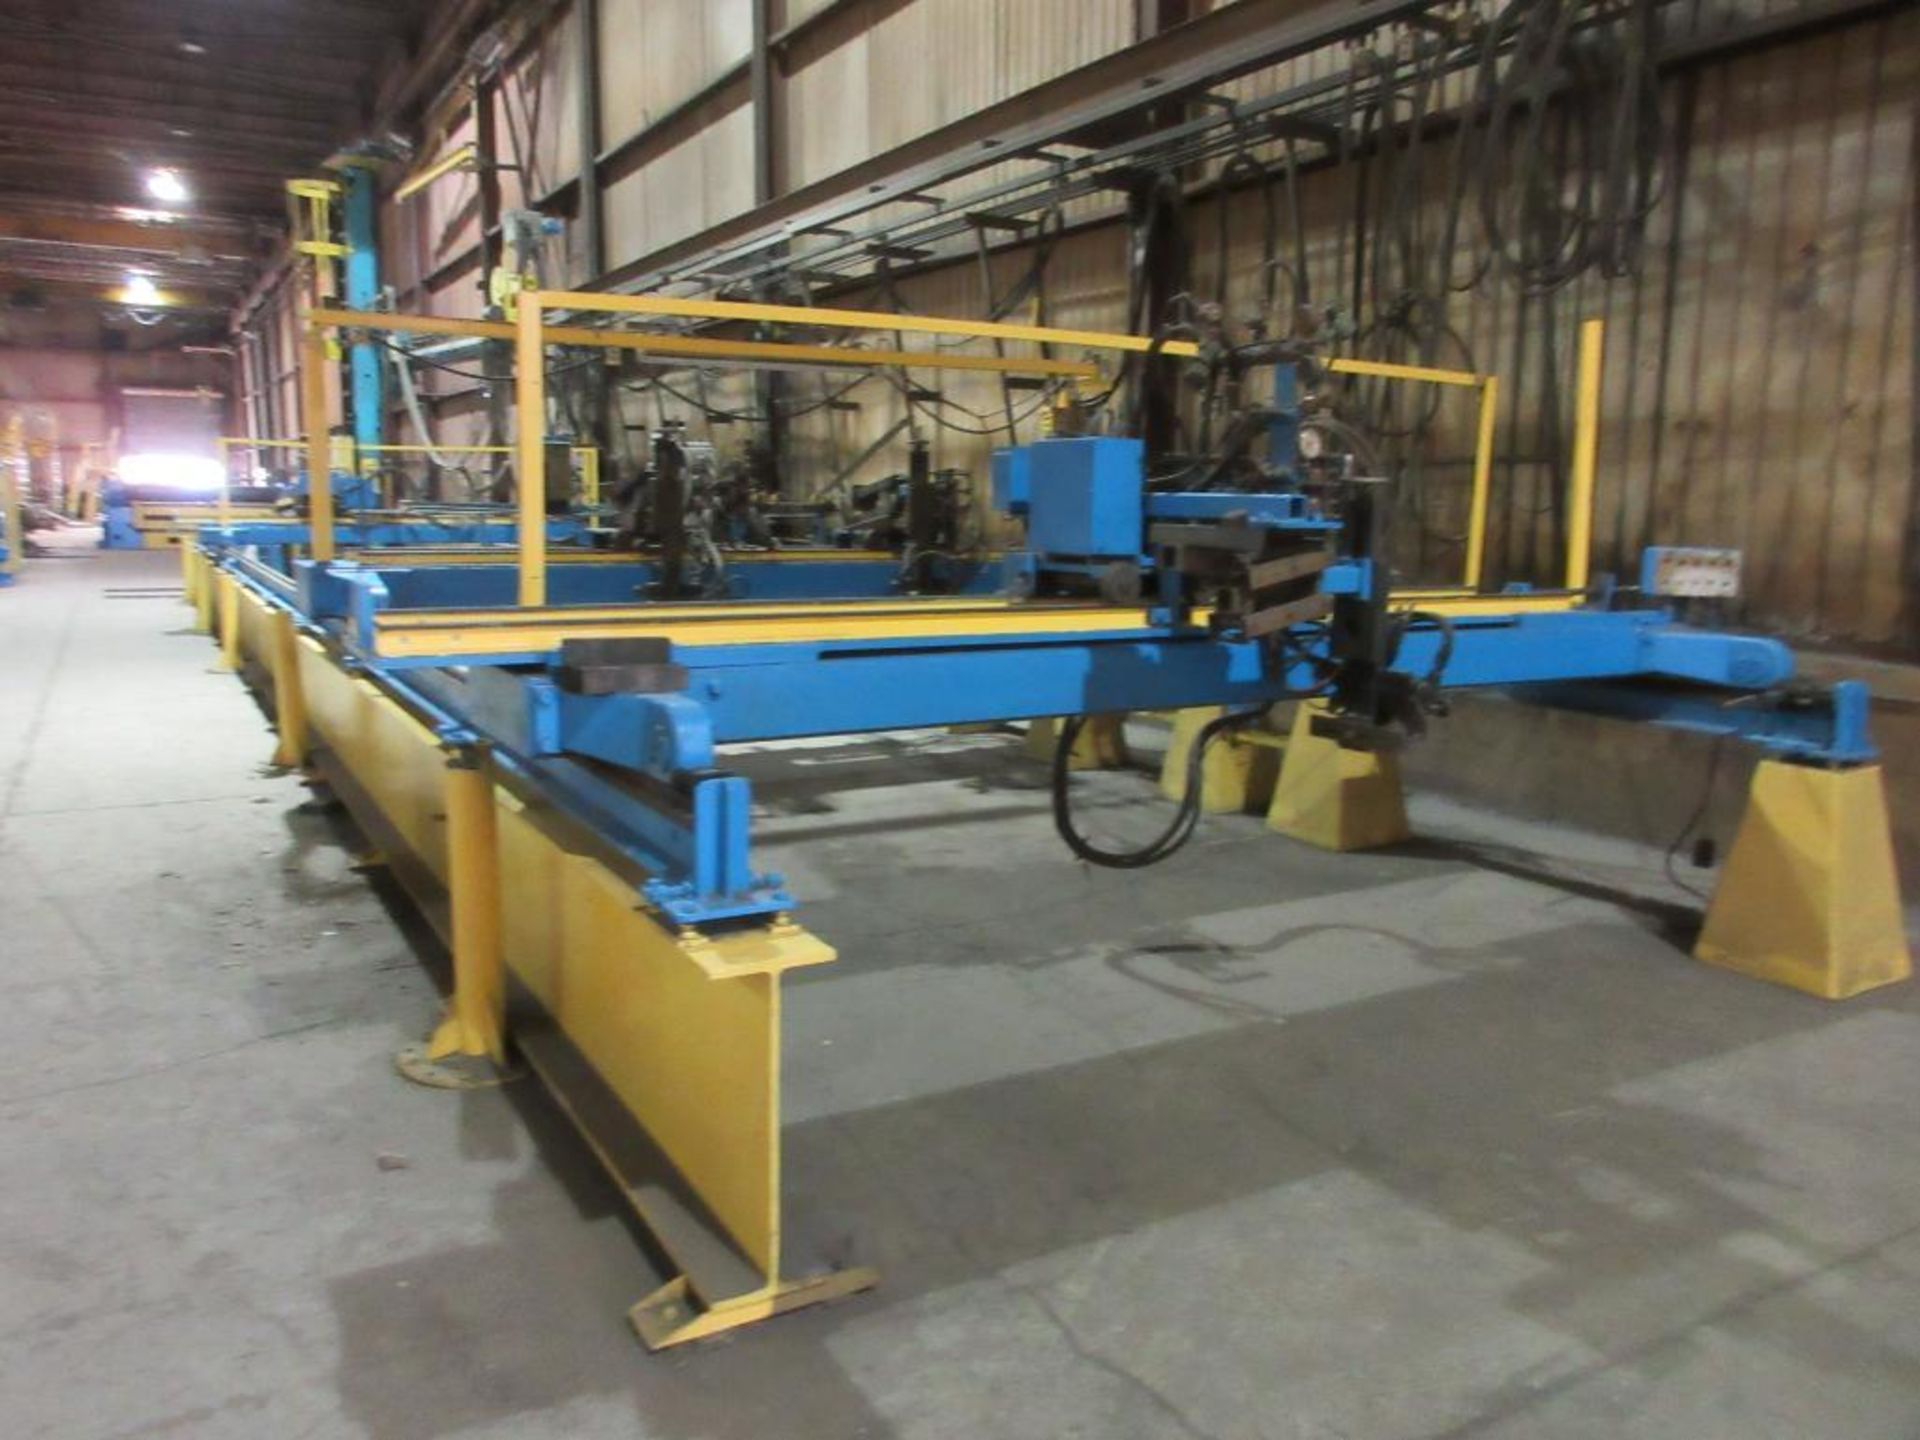 PANDJRIS CUTTING TABLE, 12'W X 66'L APPROX, WITH 3 12' BRIDGES, 3 TORCHES, TROLLIES, WALL MOUNTED WI - Image 8 of 11